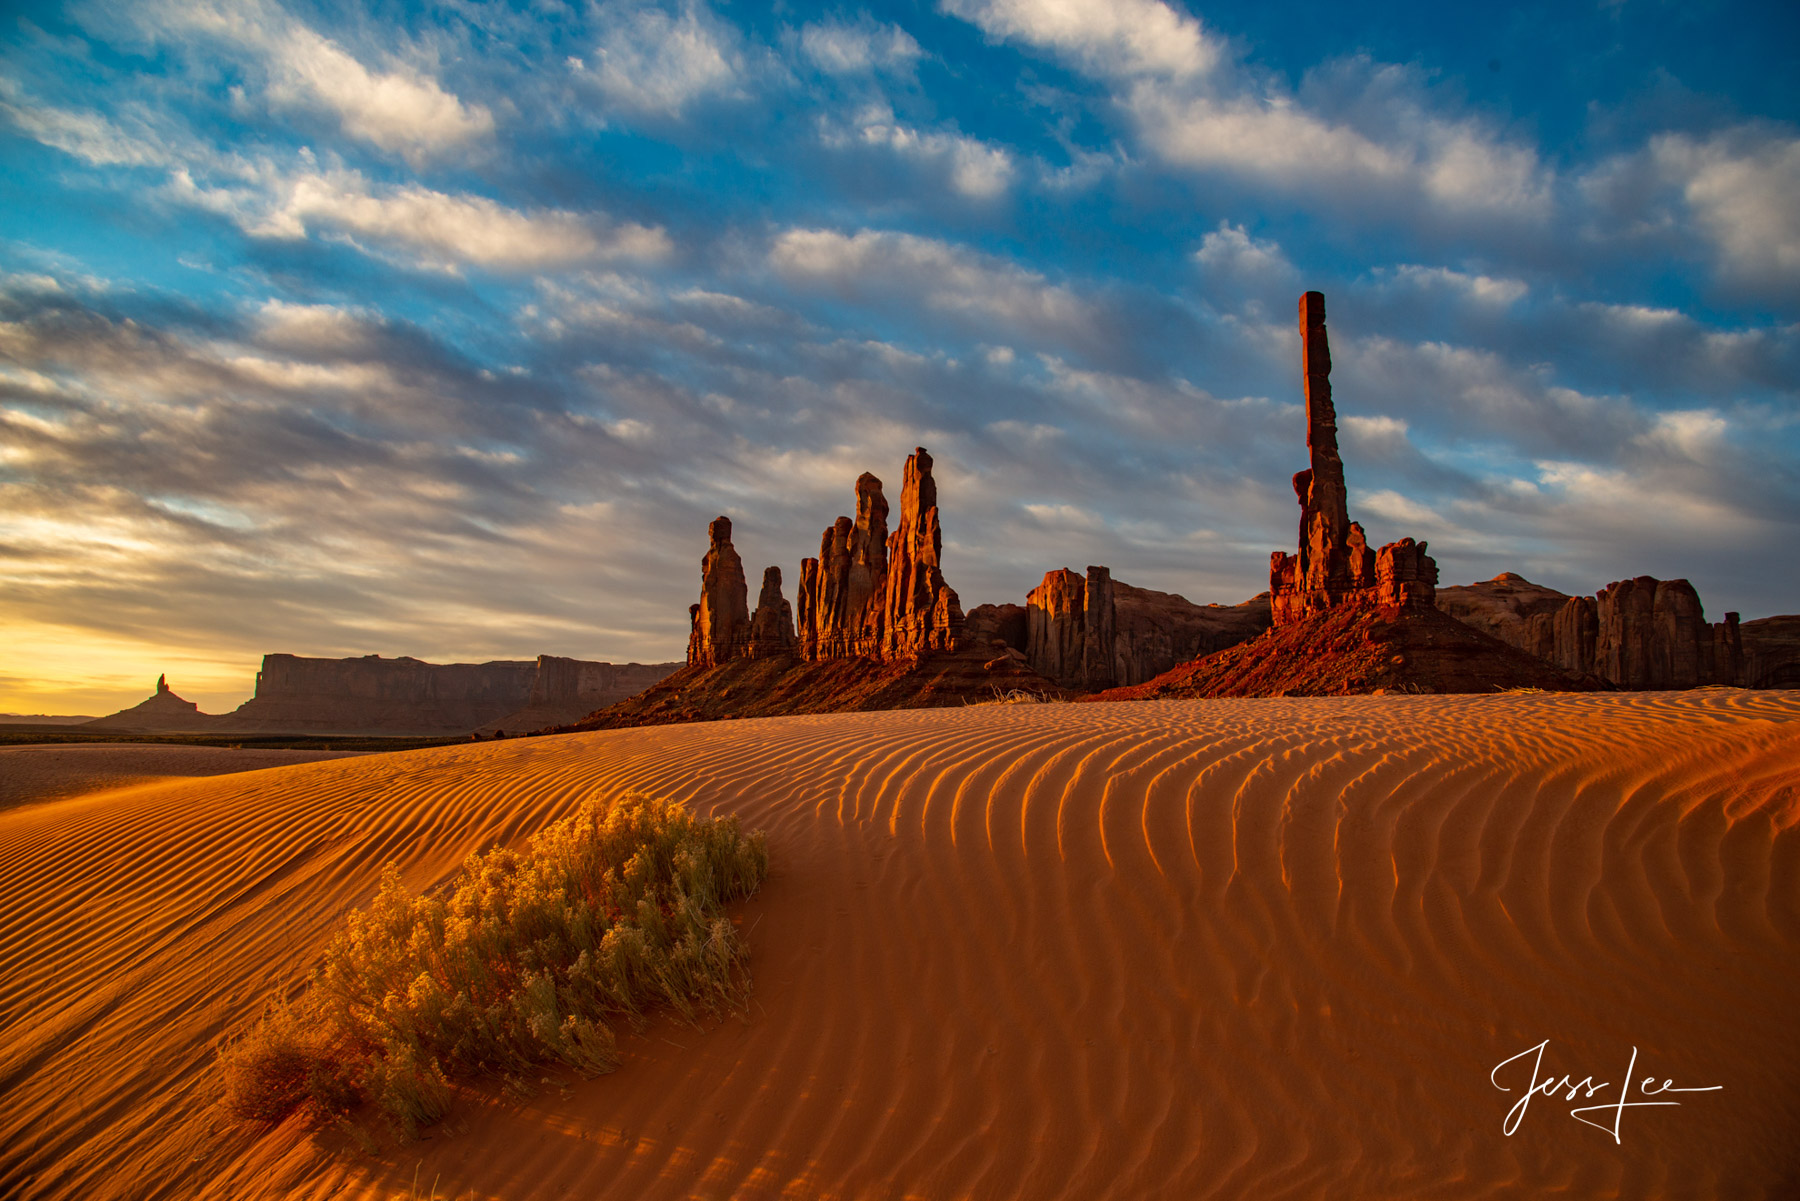 Ripples in the sand leading up to the totems in Monument Valley, Arizona. 